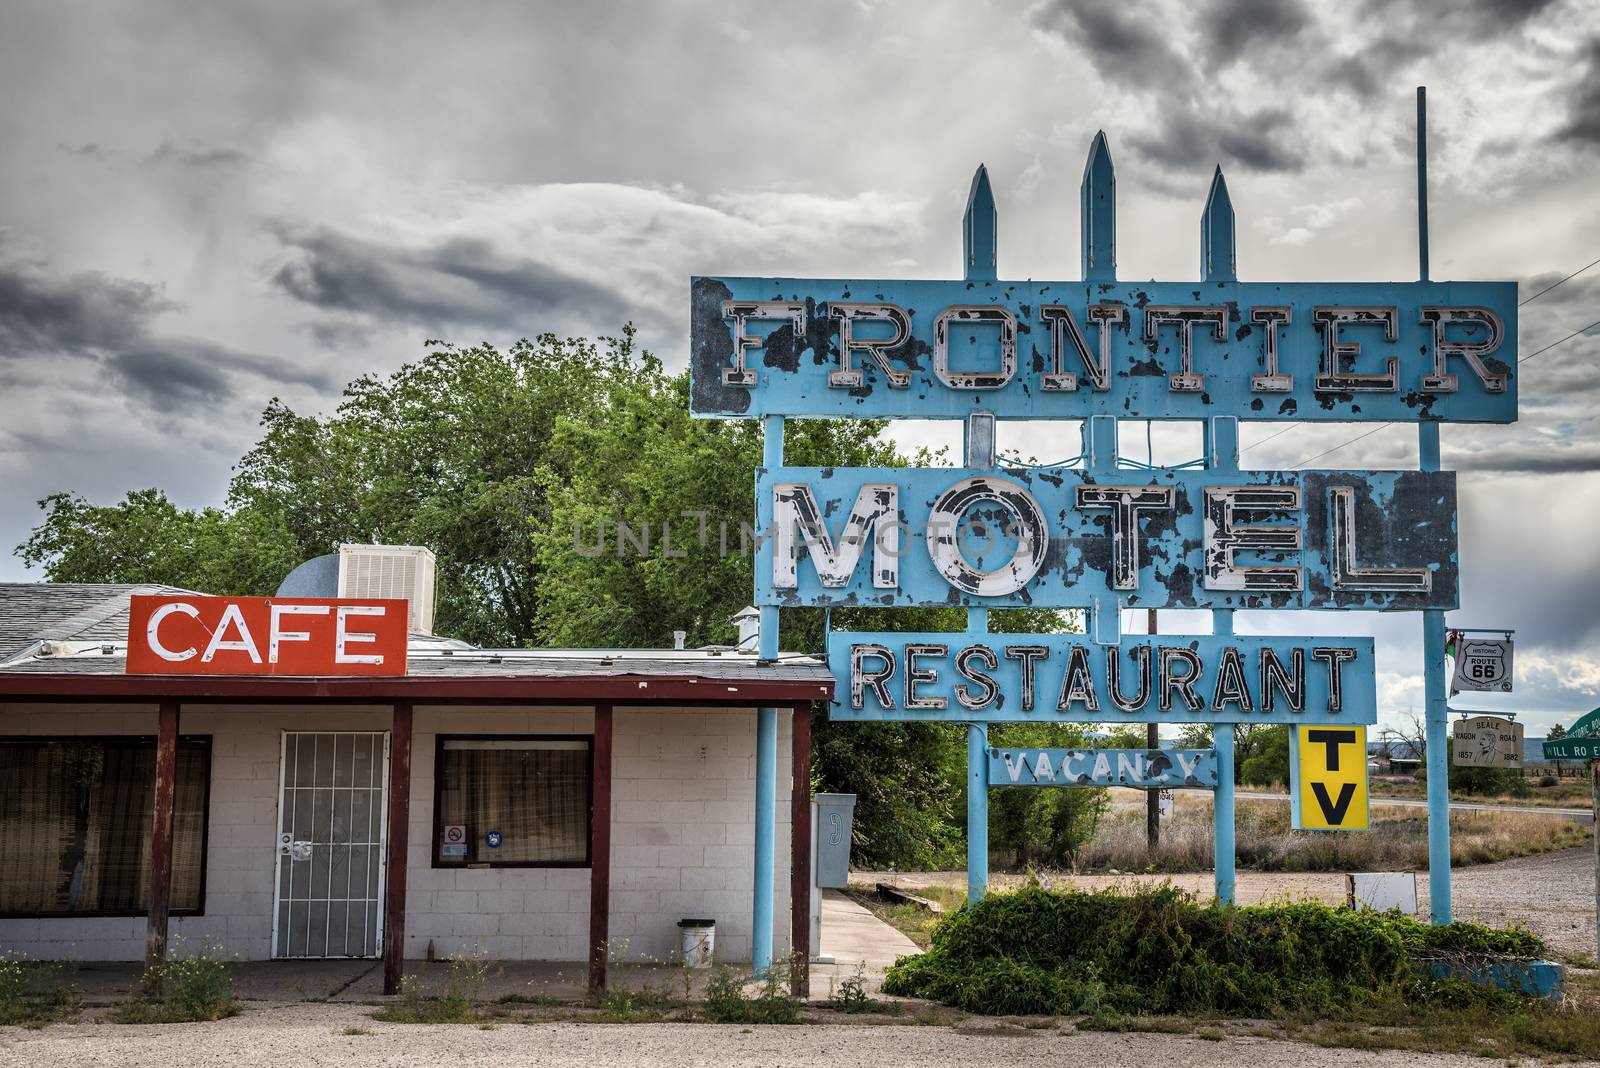 Abandoned Frontier Motel on historic route 66 in Arizona by nickfox